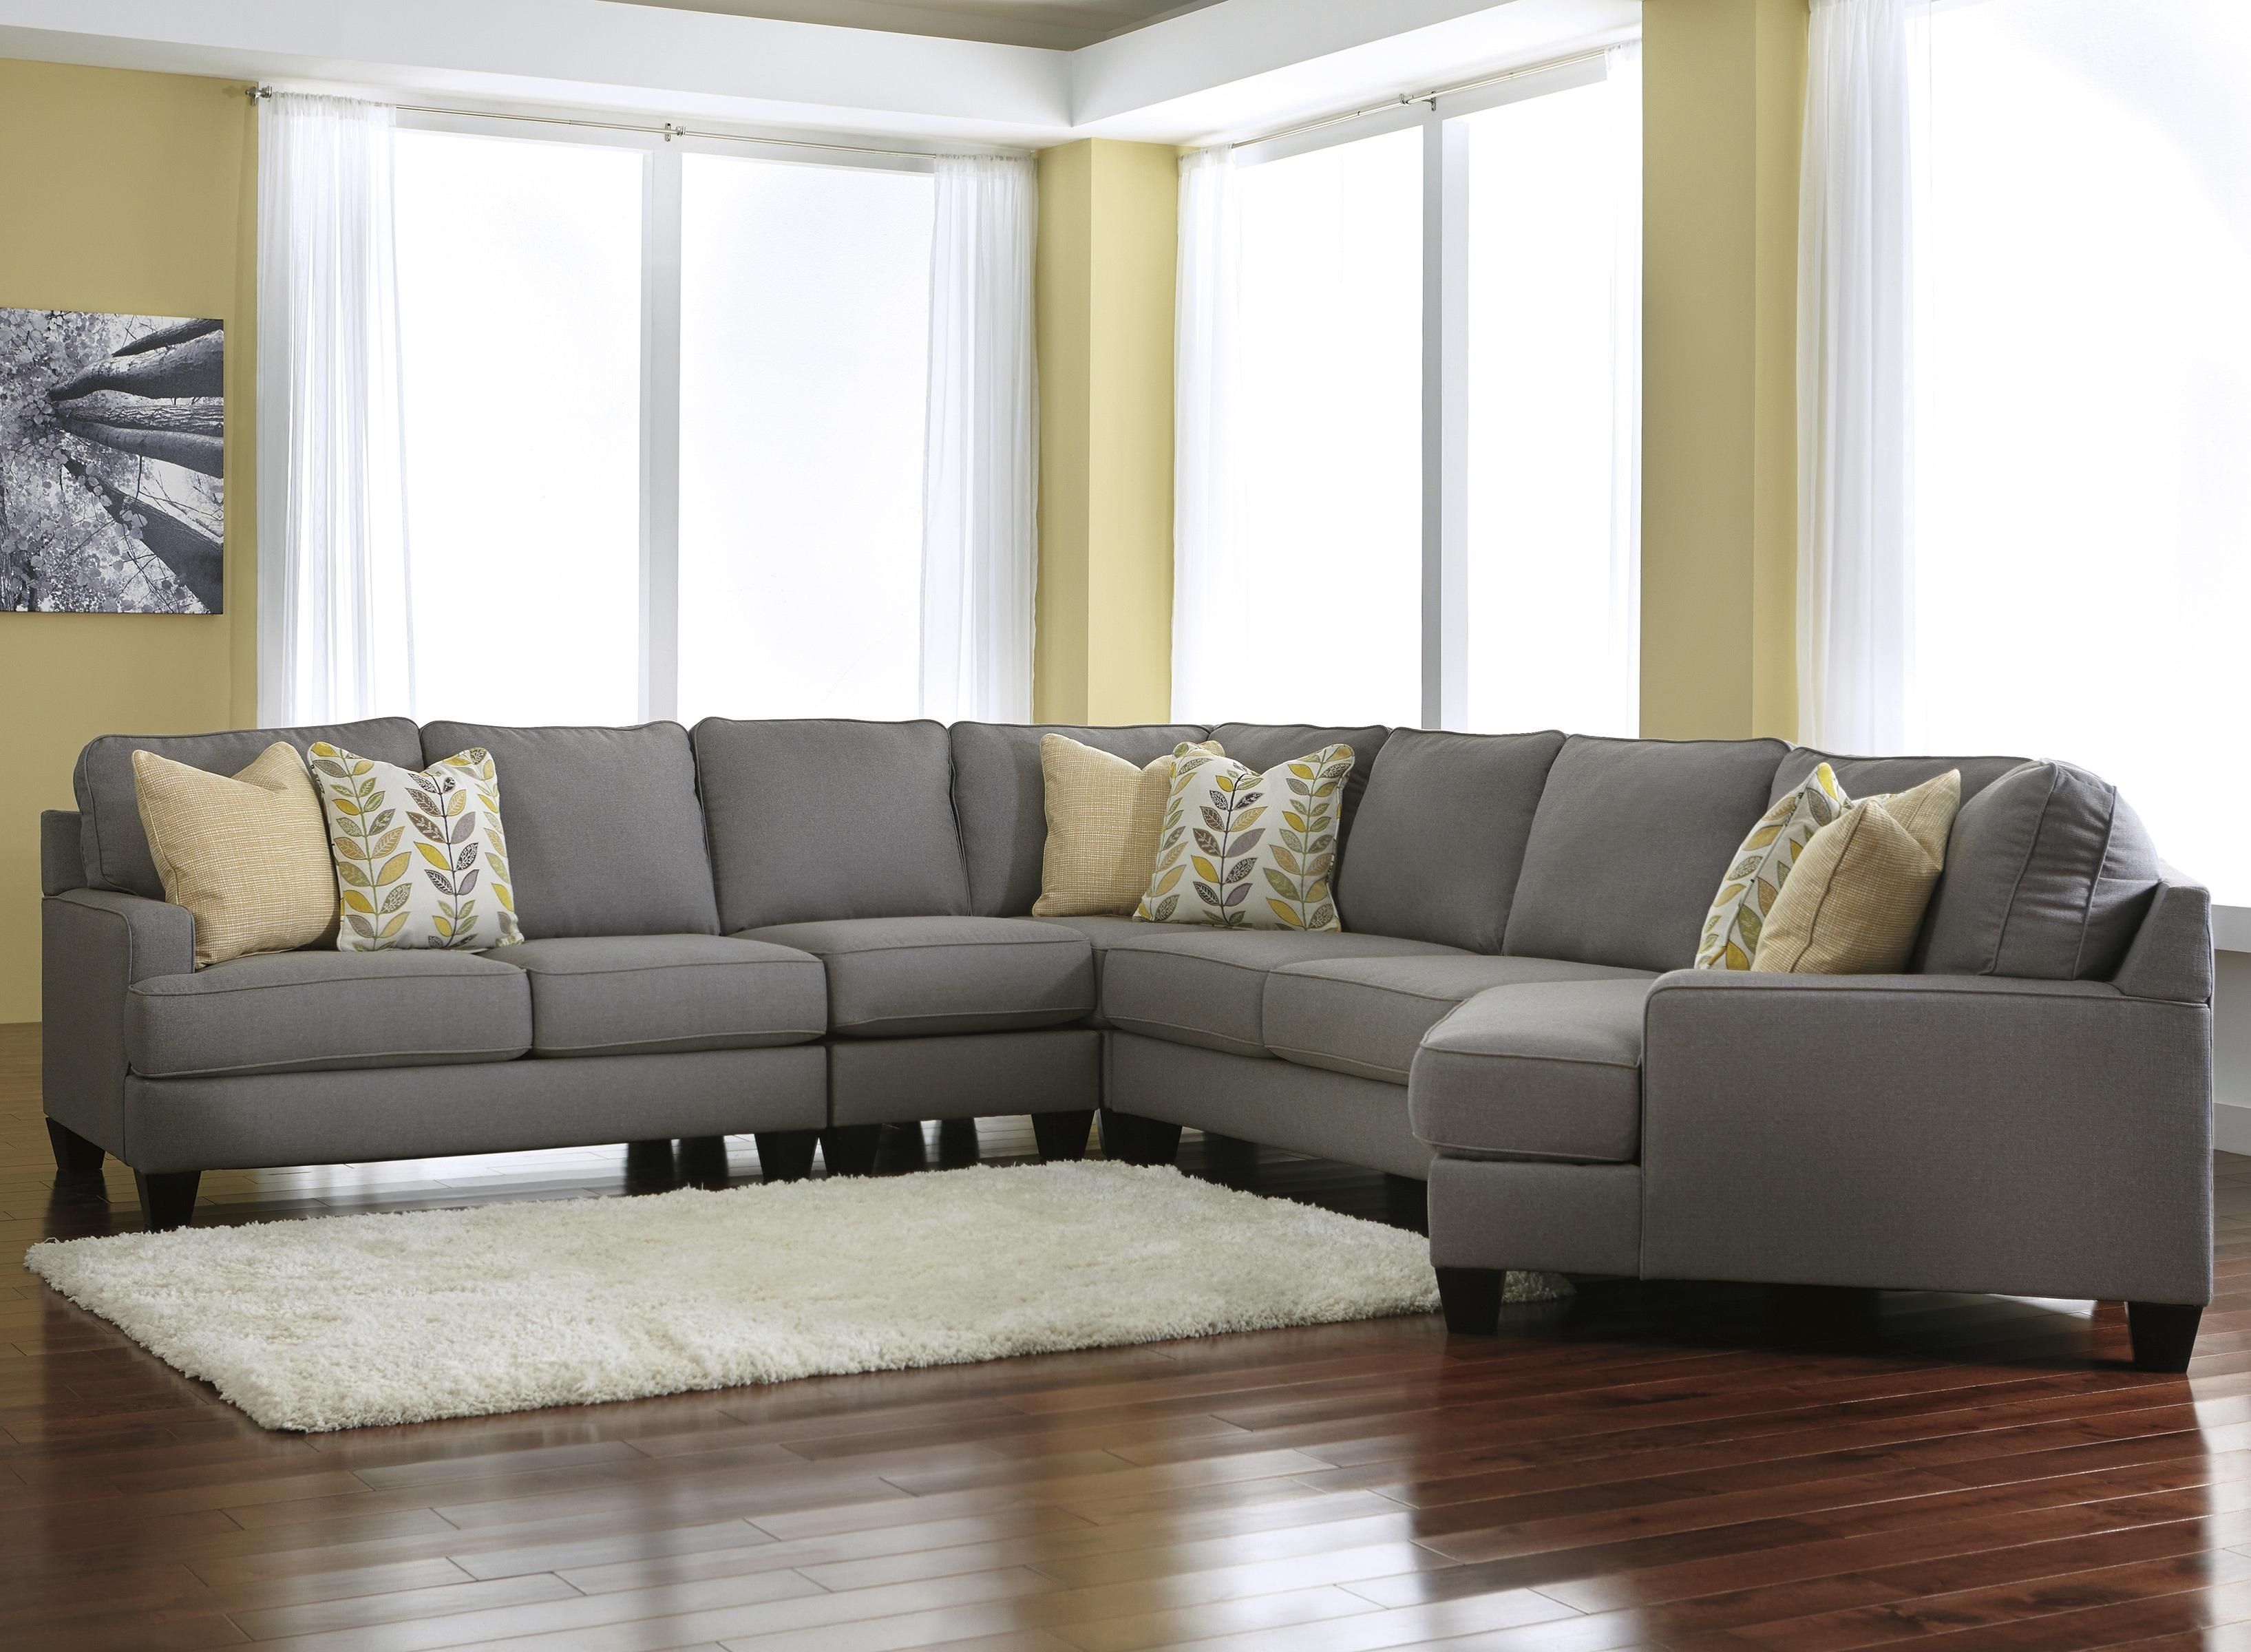 Signature Designashley Chamberly – Alloy Modern 5 Piece Within Kansas City Mo Sectional Sofas (View 8 of 10)